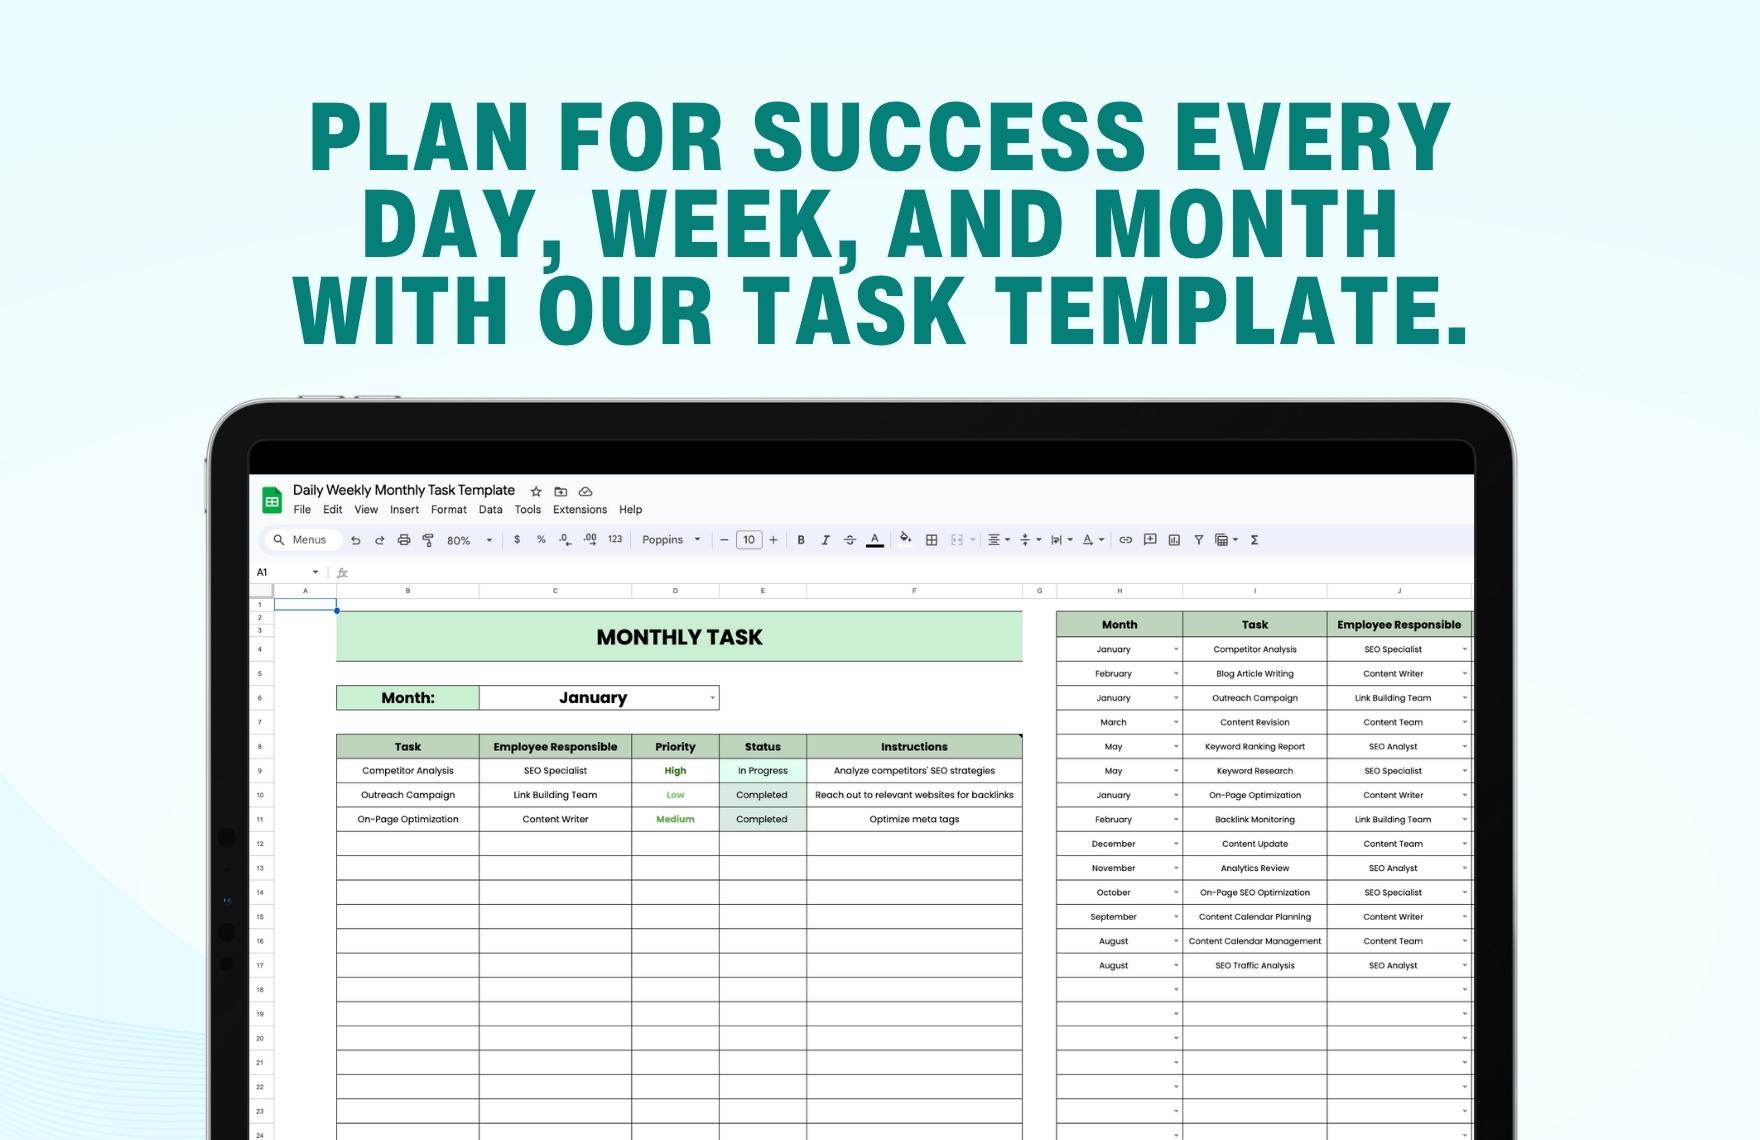 Daily Weekly Monthly Task Template